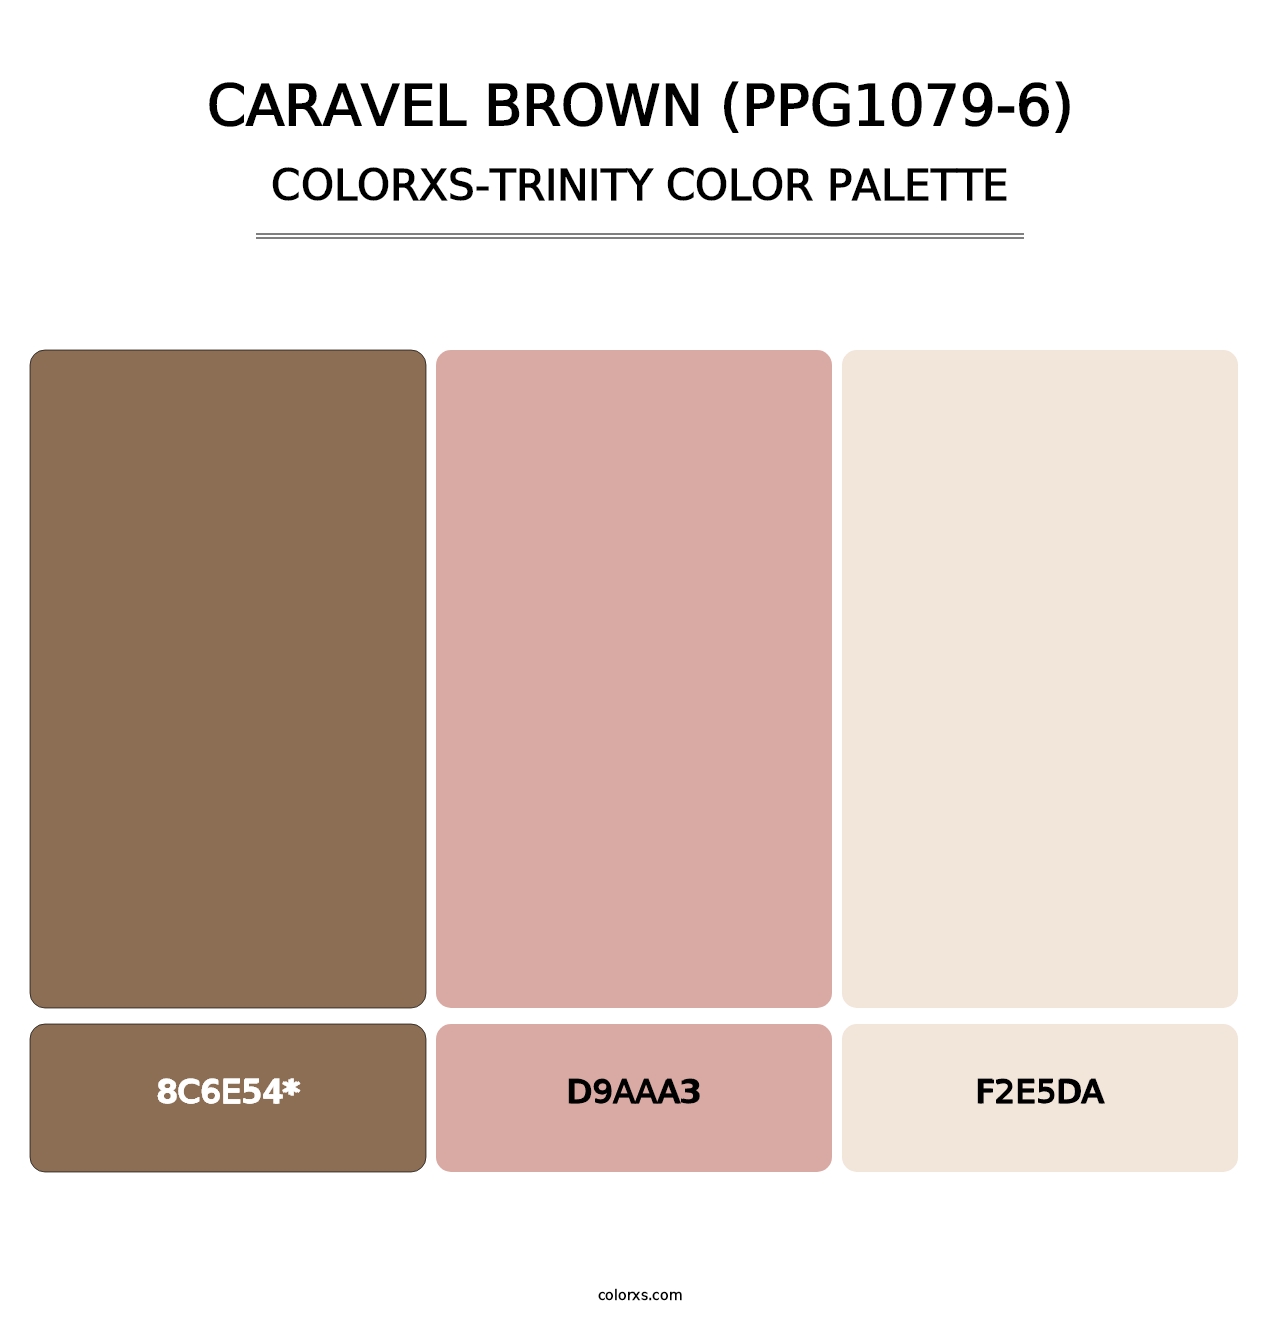 Caravel Brown (PPG1079-6) - Colorxs Trinity Palette